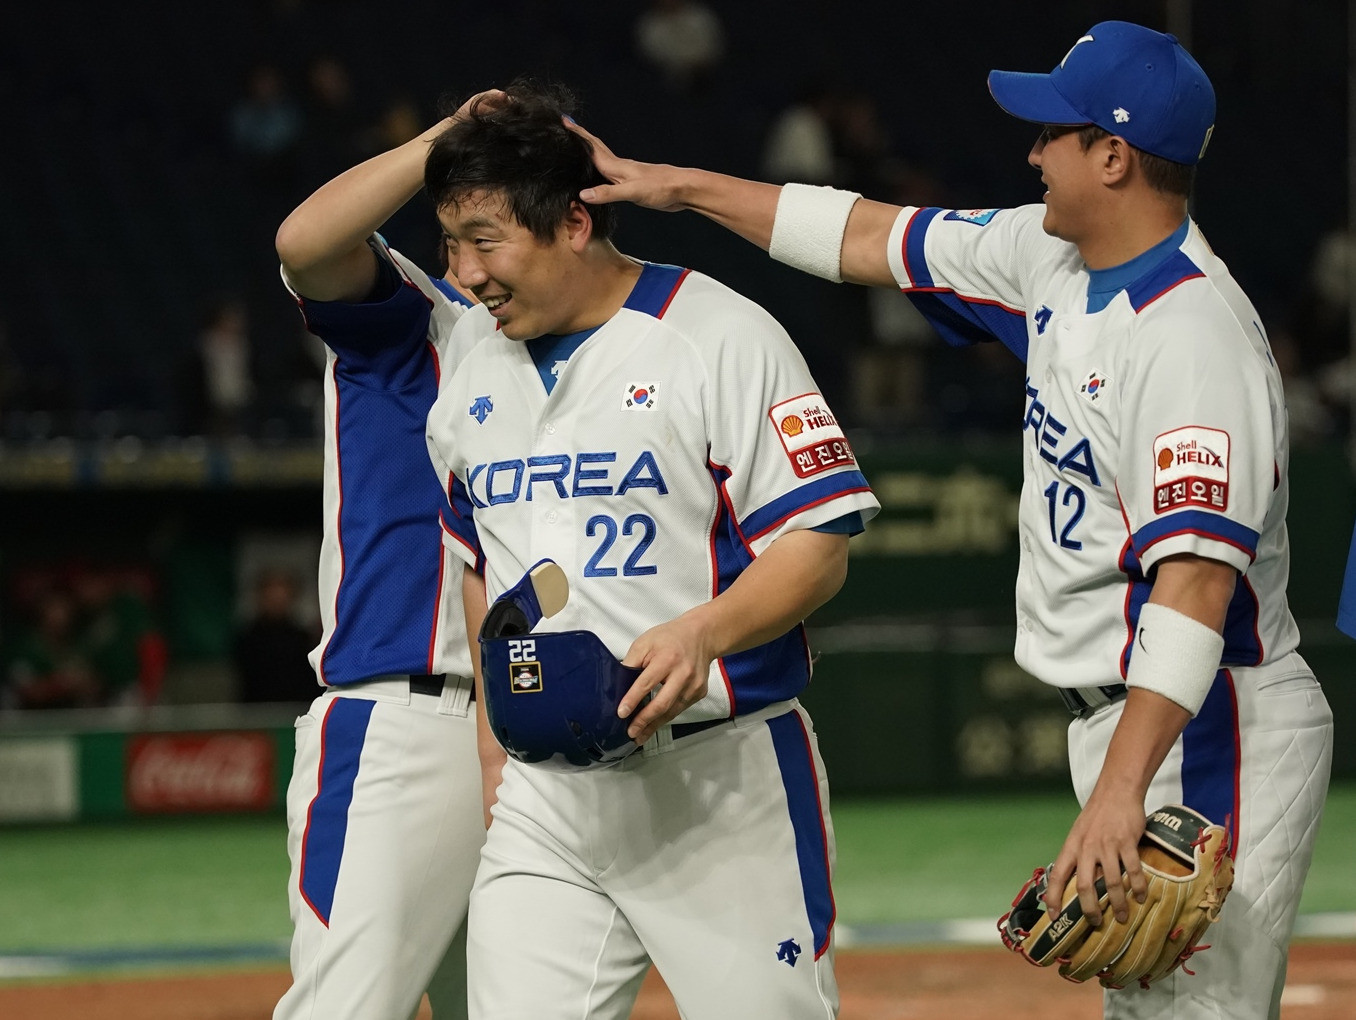 South Korea booked their place at Tokyo 2020 by defeating Mexico 7-3 in Tokyo ©WBSC